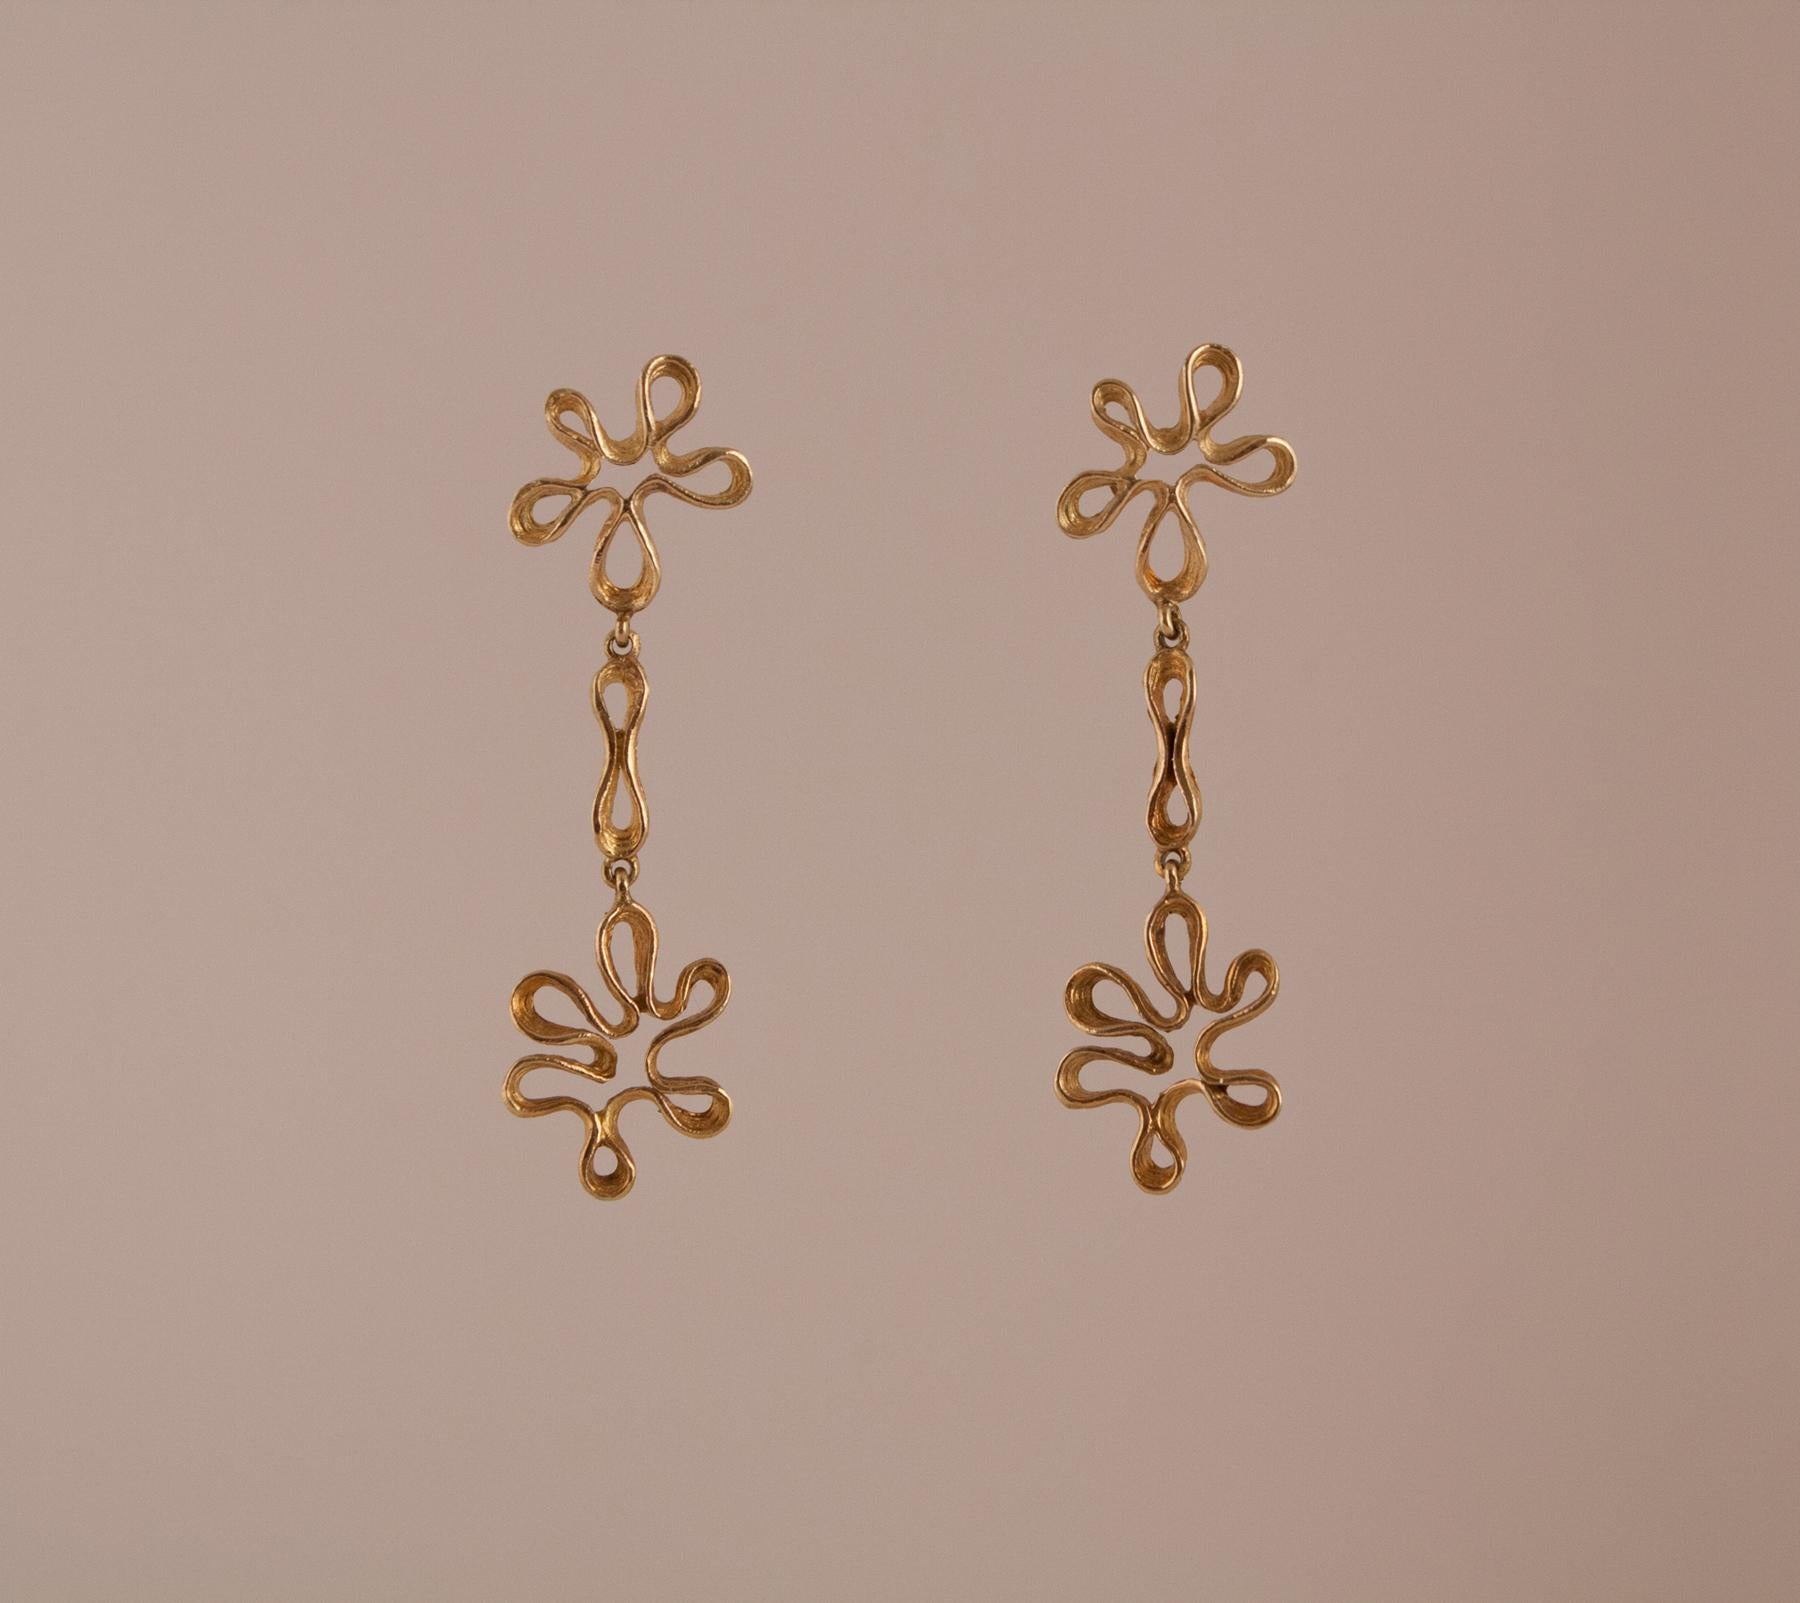 Such a fun pair of 14 karat gold dangle earrings with a free form 